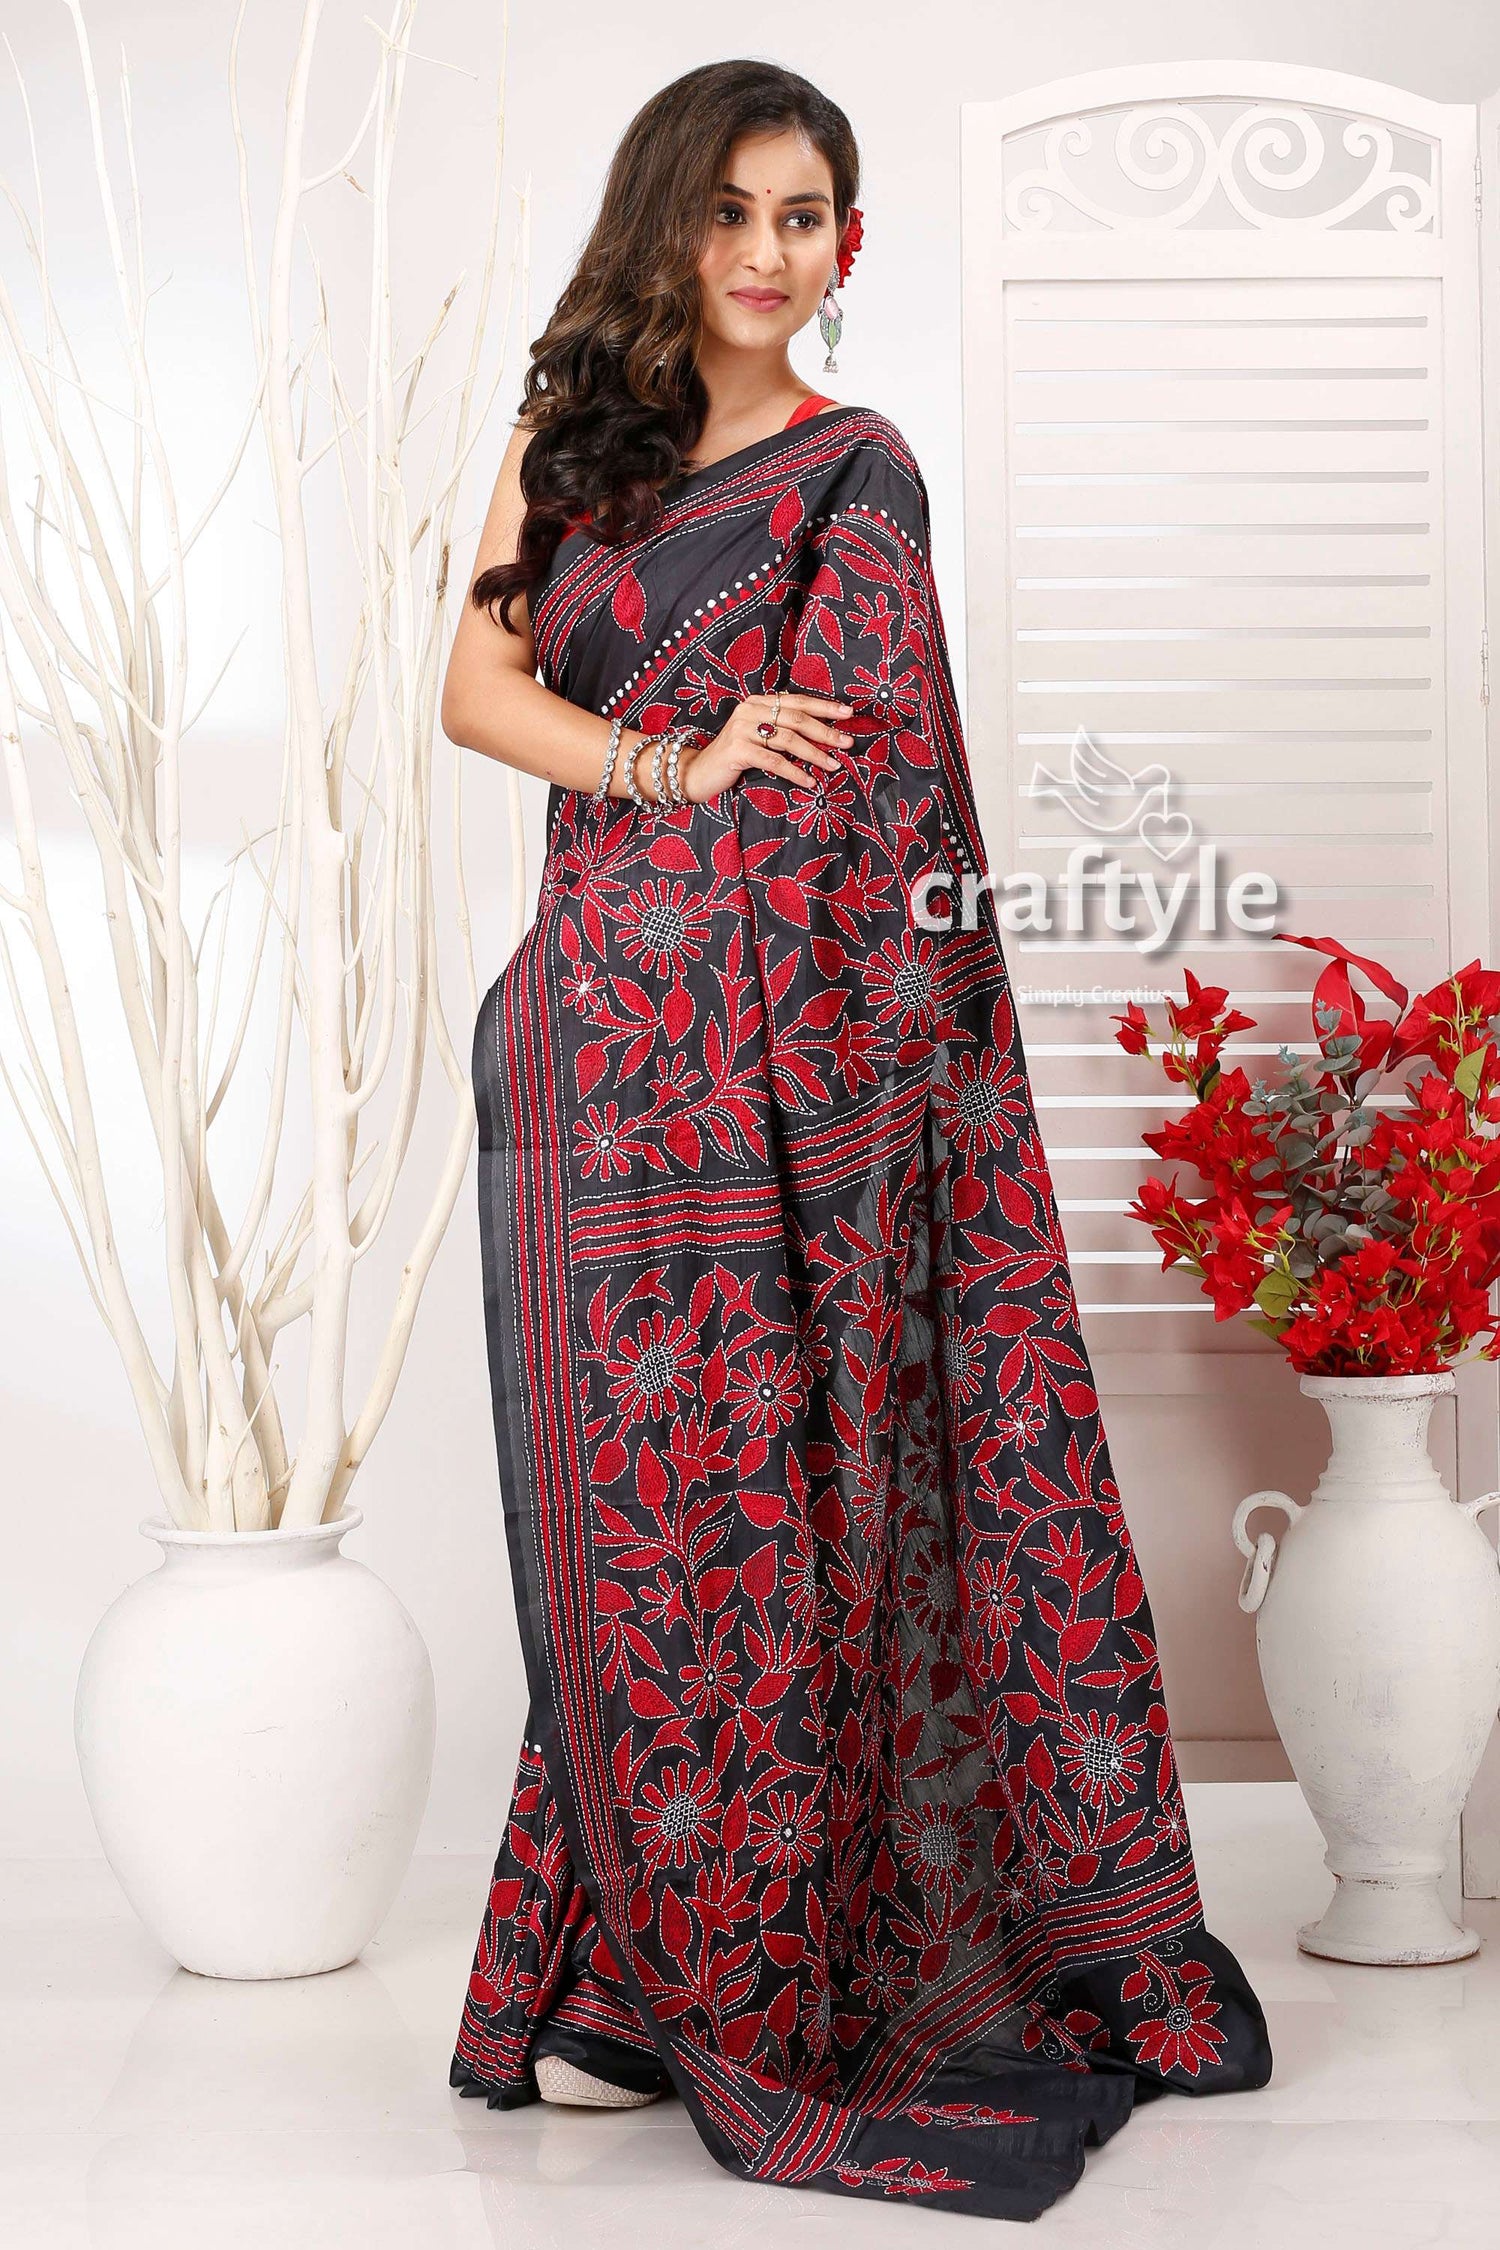 Black and Maroon Floral Exquisite Silk Kantha Embroidery Saree - Craftyle